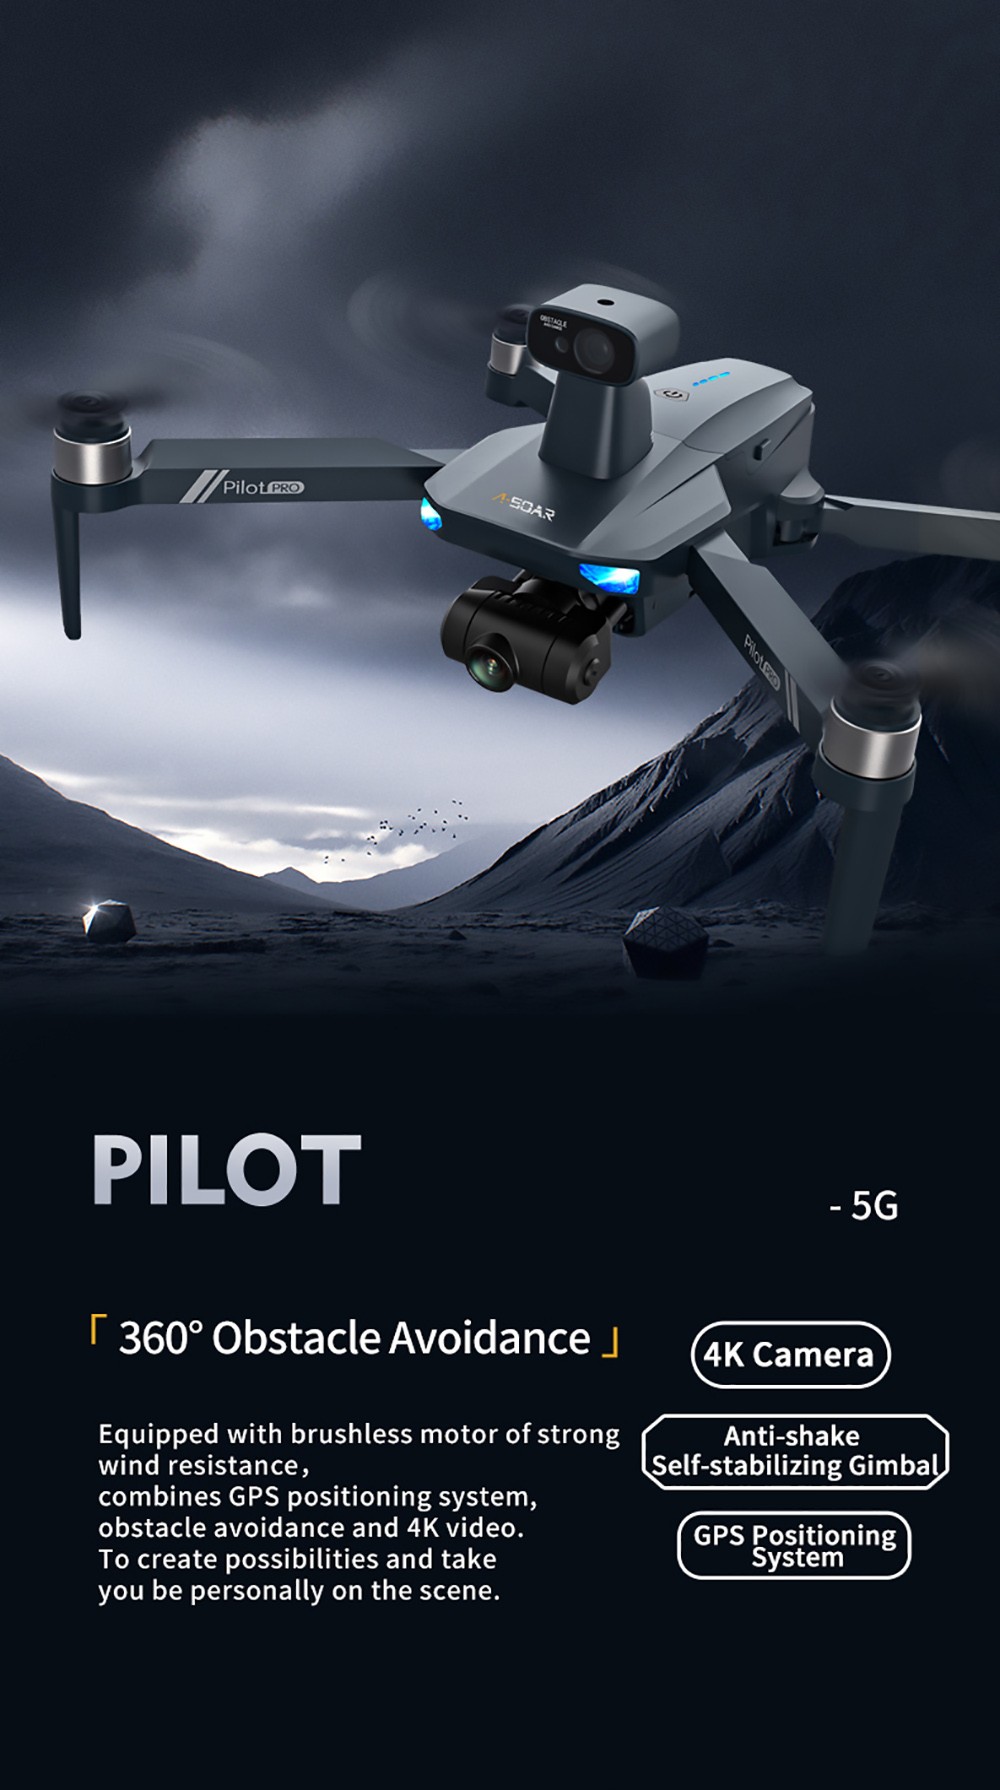 Get the JJRC X19 PRO 4K 5G WiFi FPV GPS Drone for only 115€ with our Exclusive Coupon - GEEKBUYING